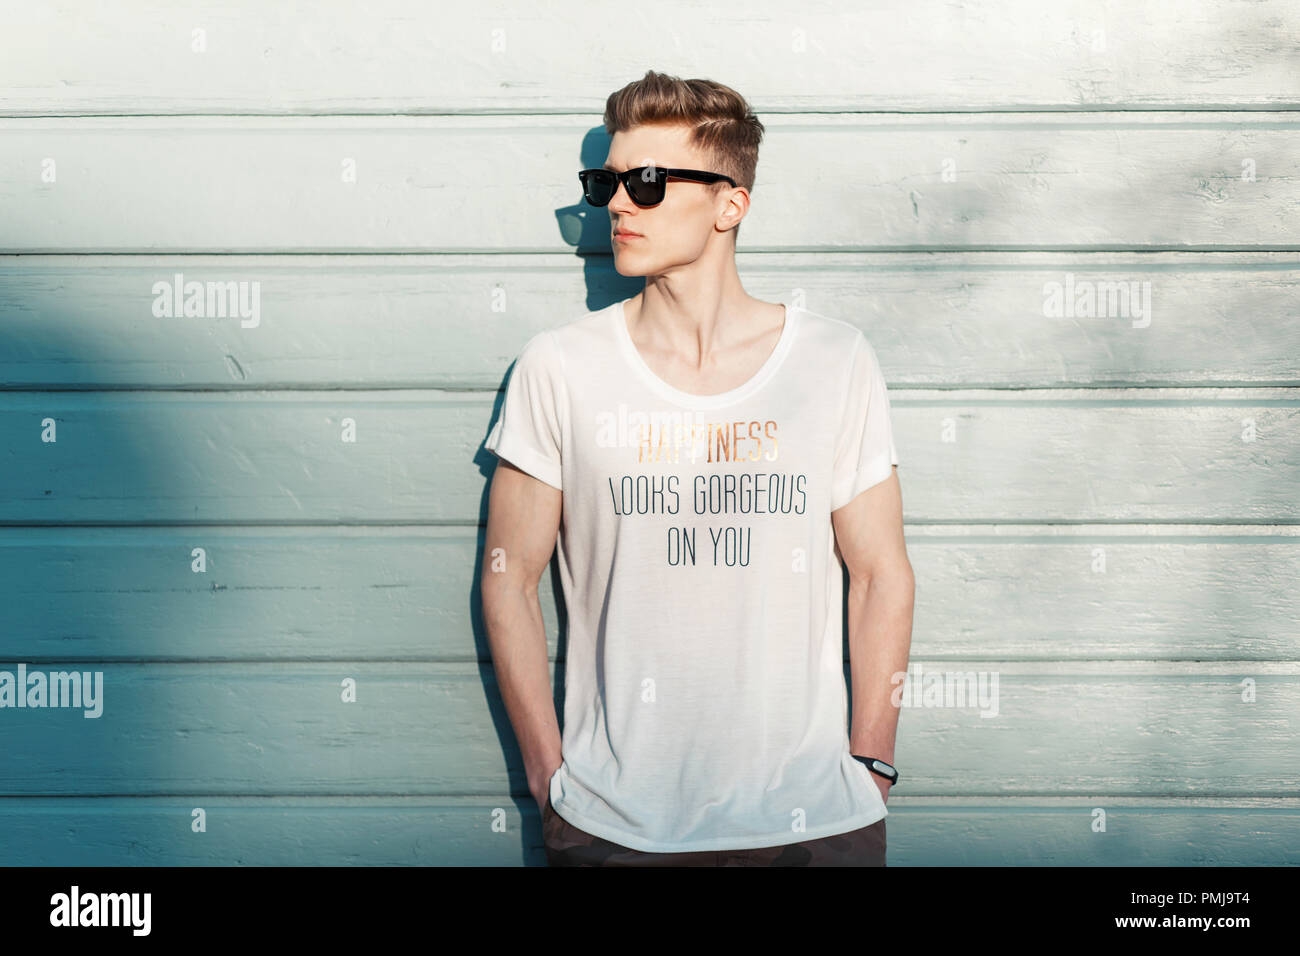 Handsome fashion man hipster in stylish sunglasses in a white T-shirt posing near a blue wooden wall on the beach on a sunny day. Happiness looks gorg Stock Photo